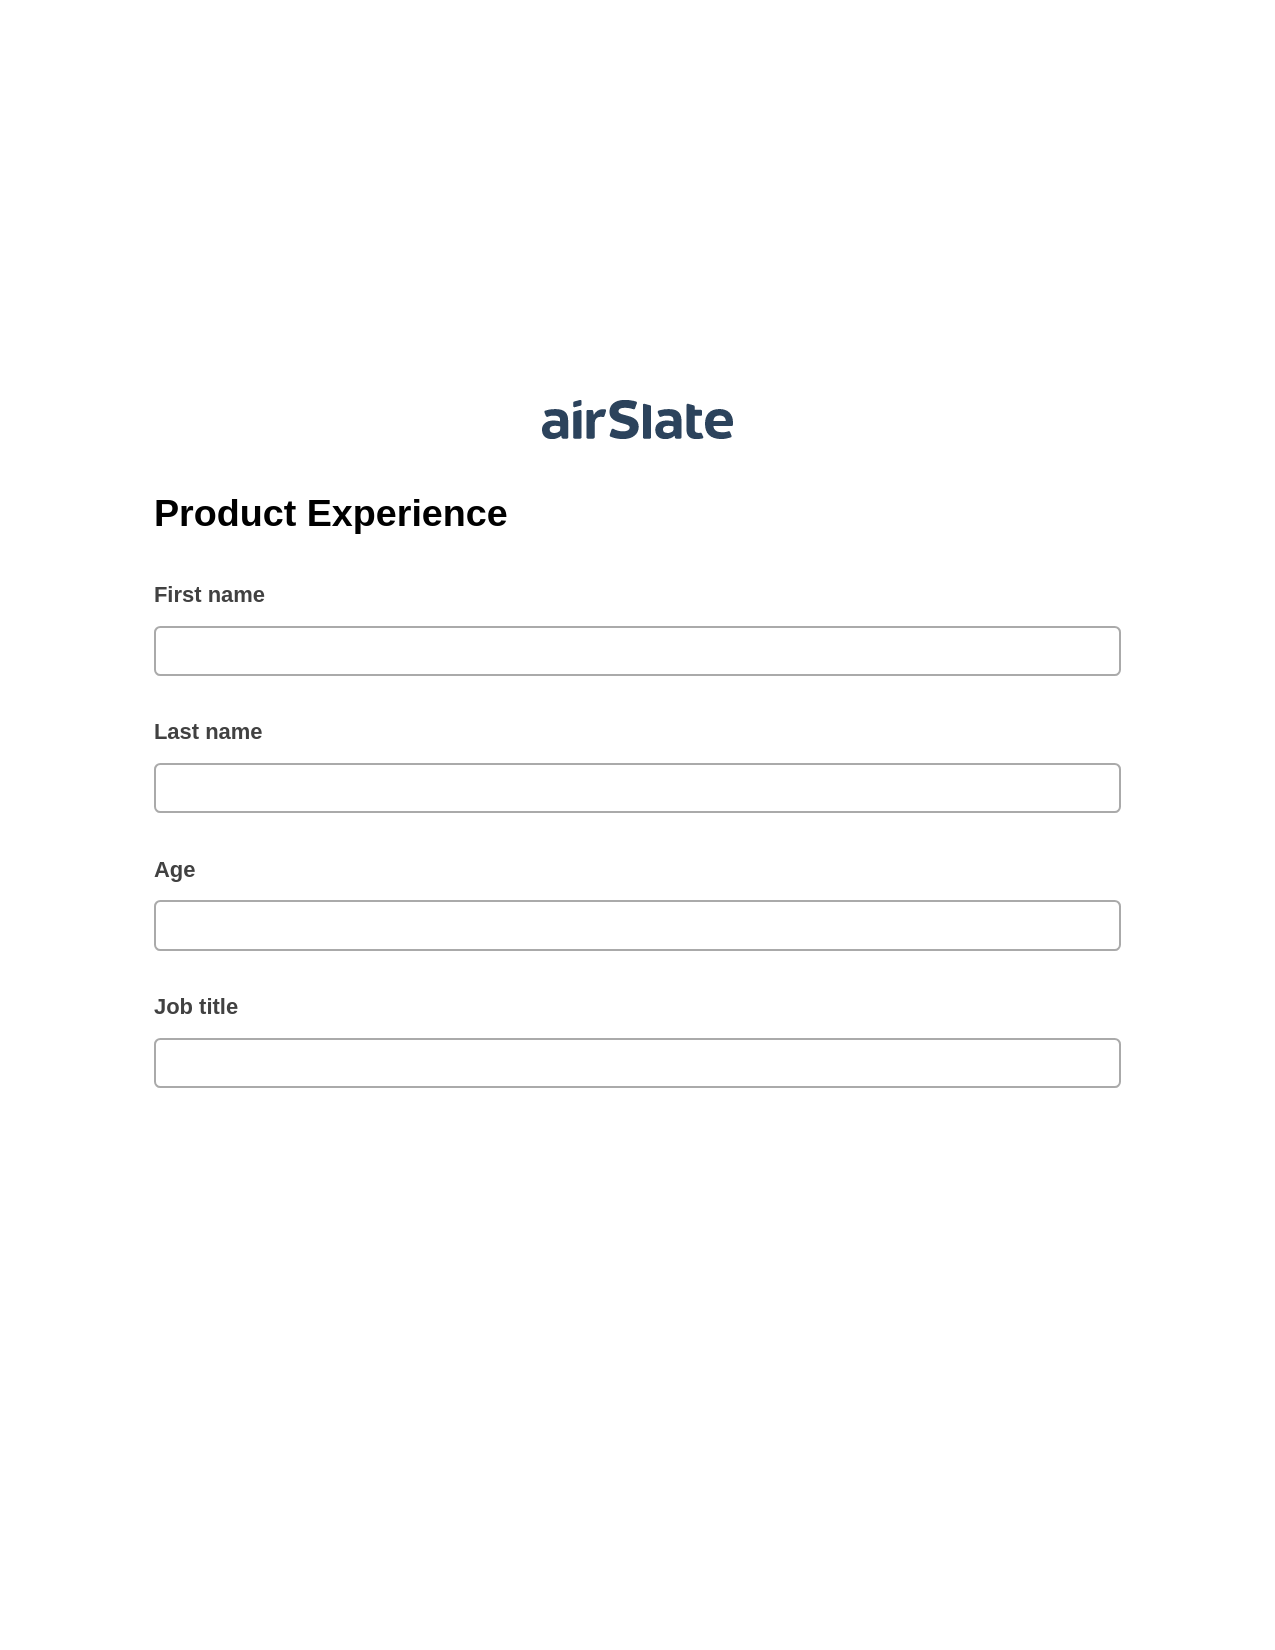 Product Experience Pre-fill Dropdowns from MySQL Bot, Send Mailchimp Campaign Bot, Export to Excel 365 Bot